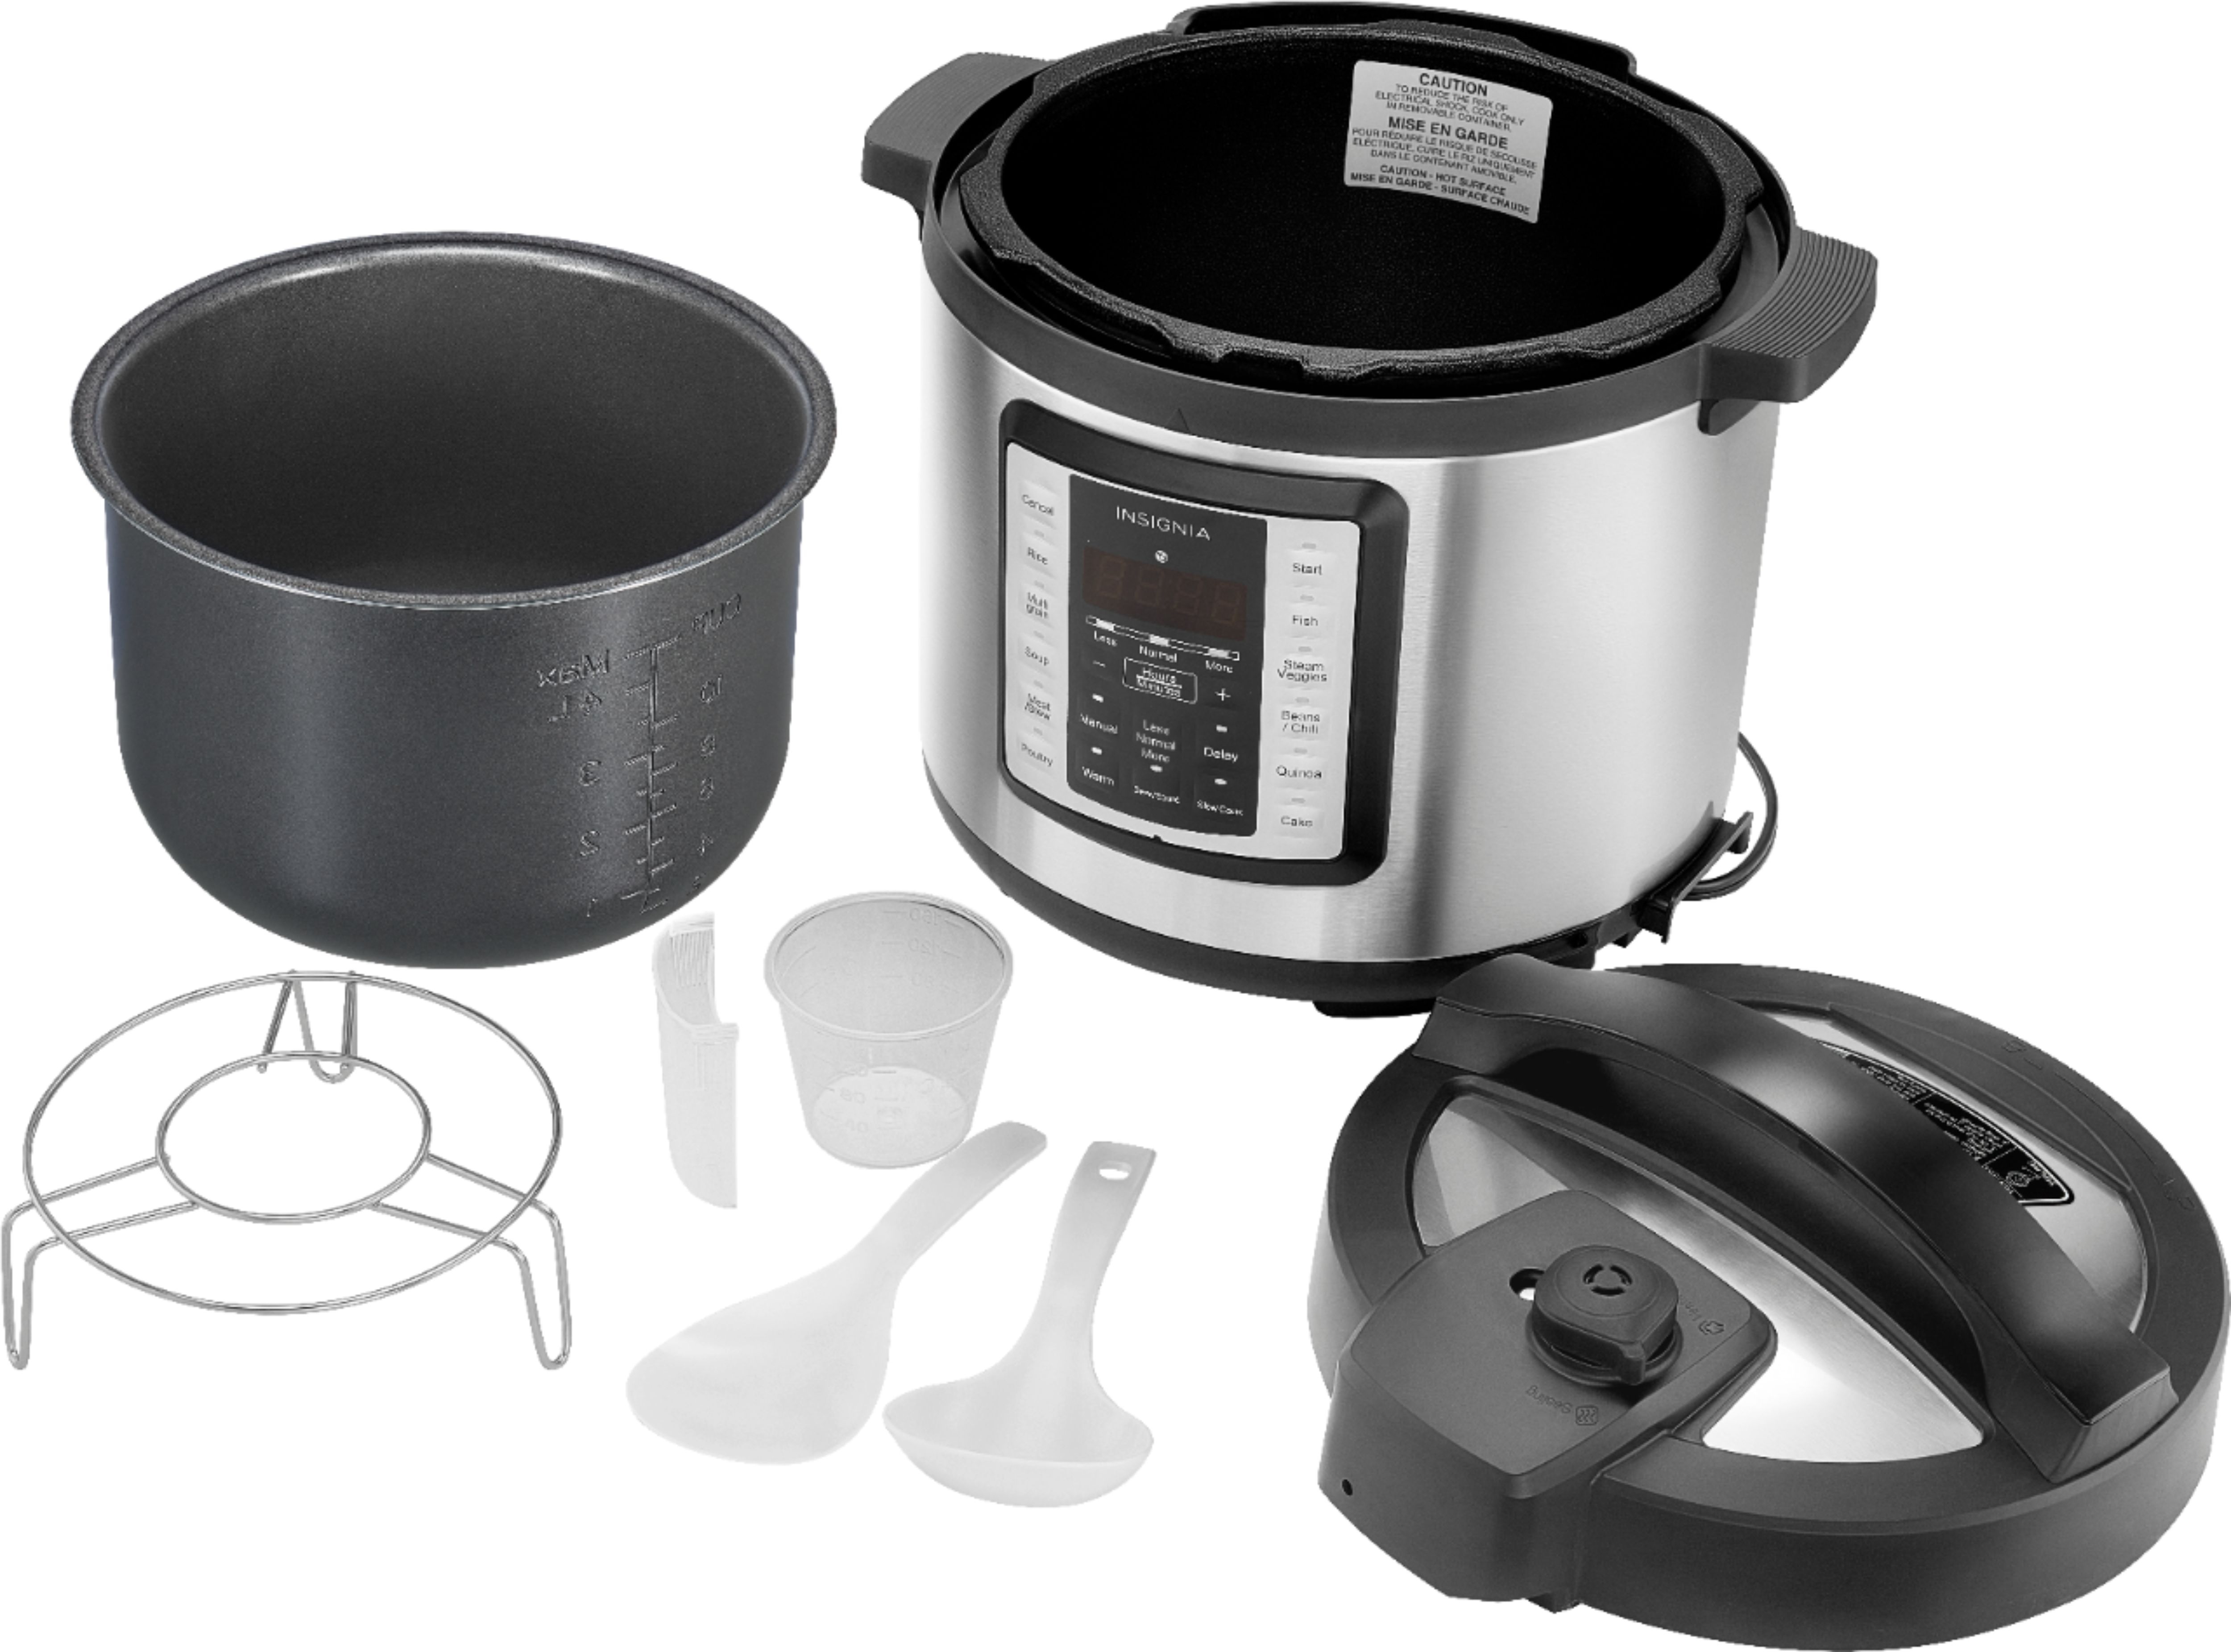 Details about   Insignia 8-quart multi-function pressure cooker 